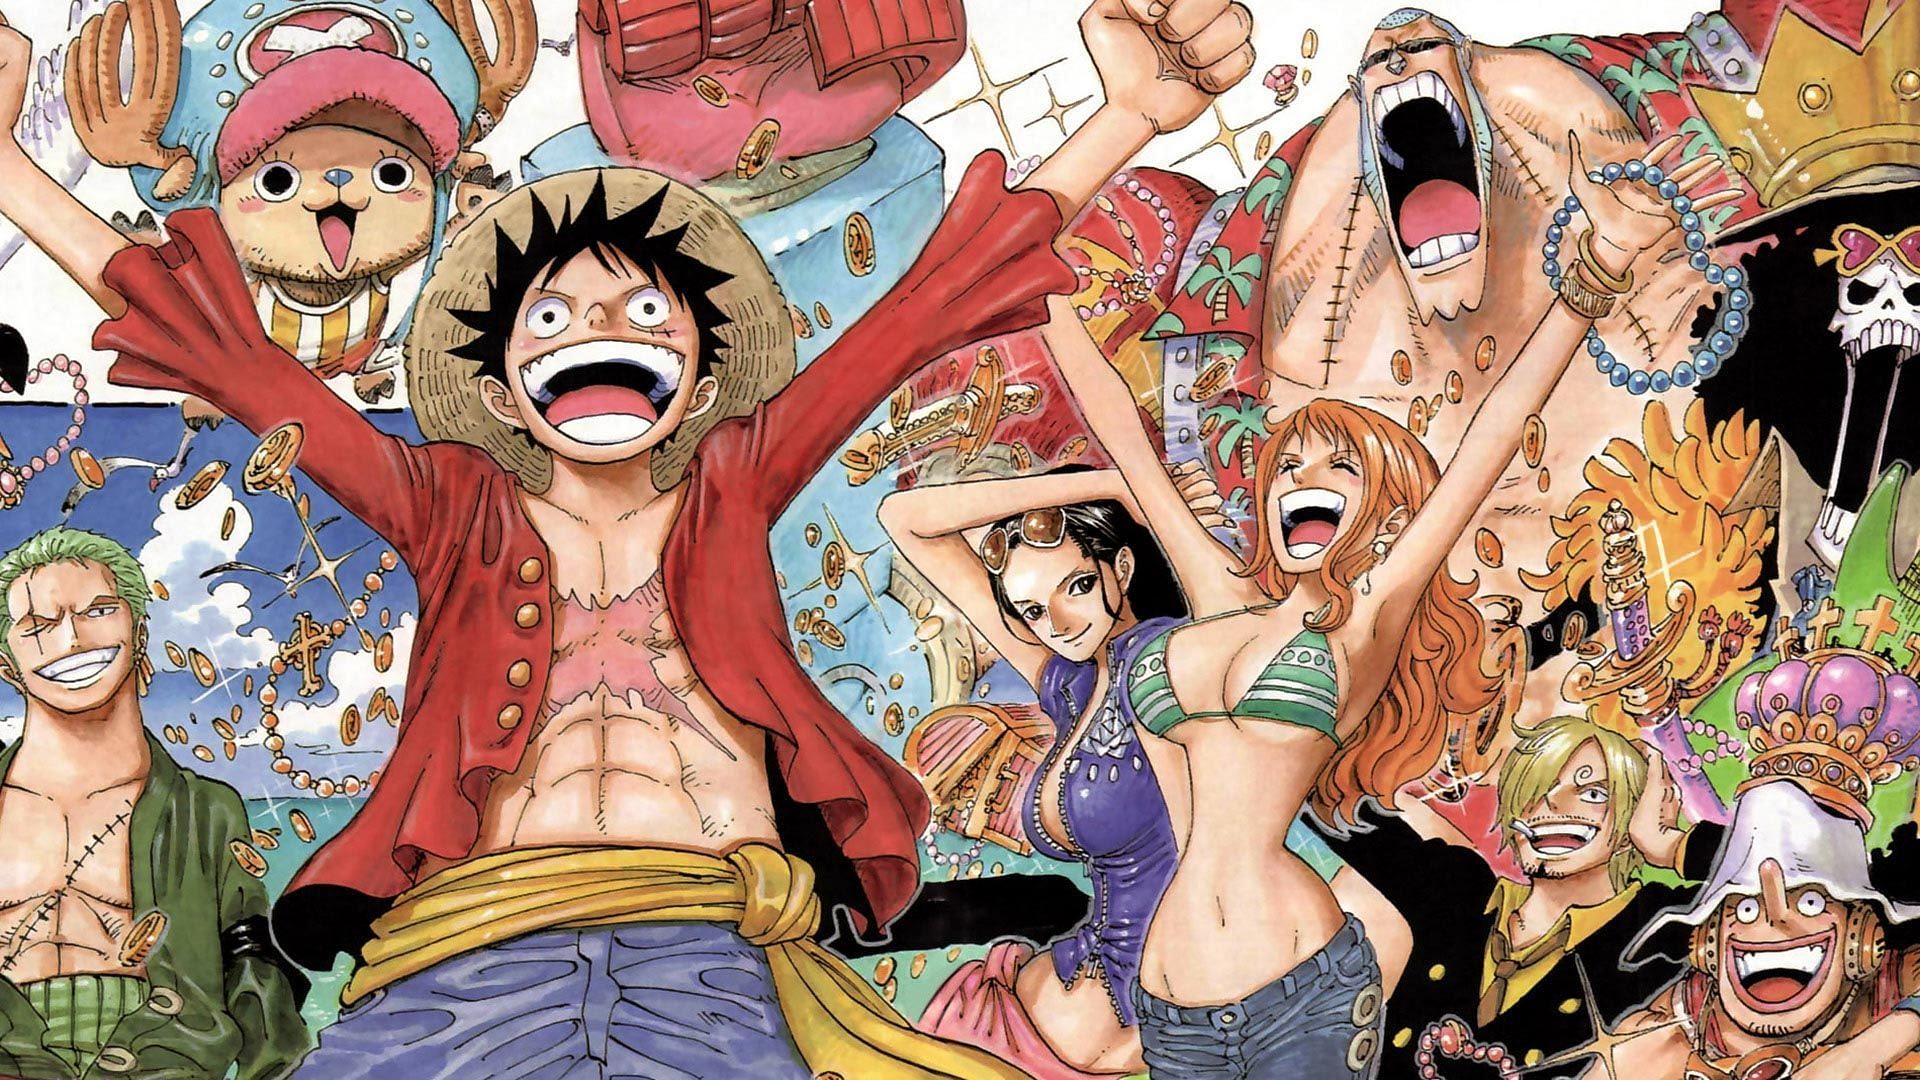 One Piece Chapter 1000 full colorspread : r/OnePiece